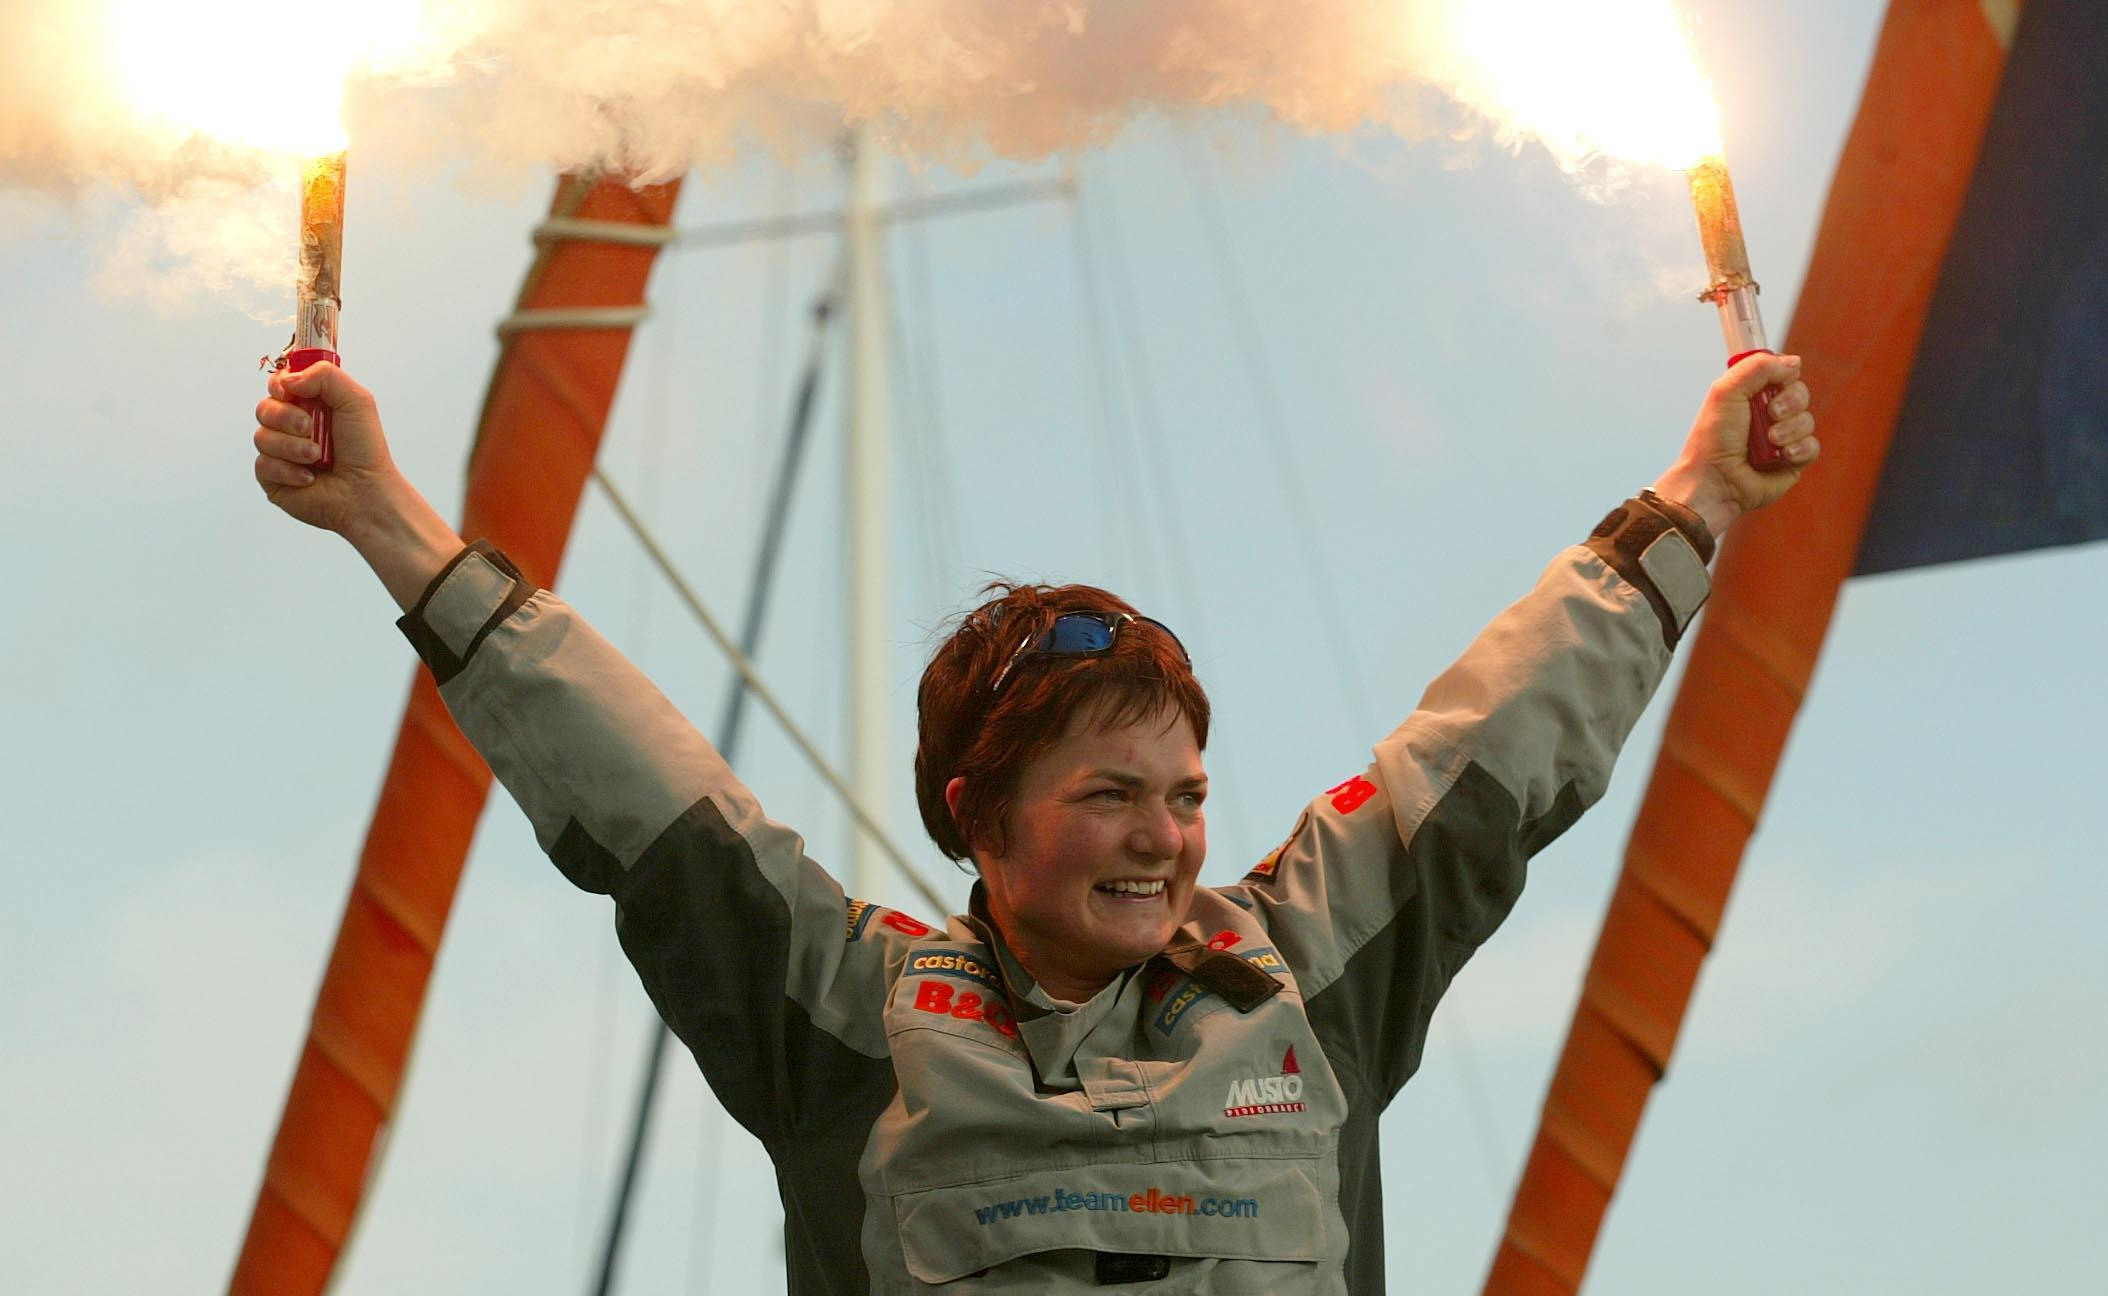 Dame Ellen MacArthur celebrates becoming the fastest person to circumnavigate the globe single-handed